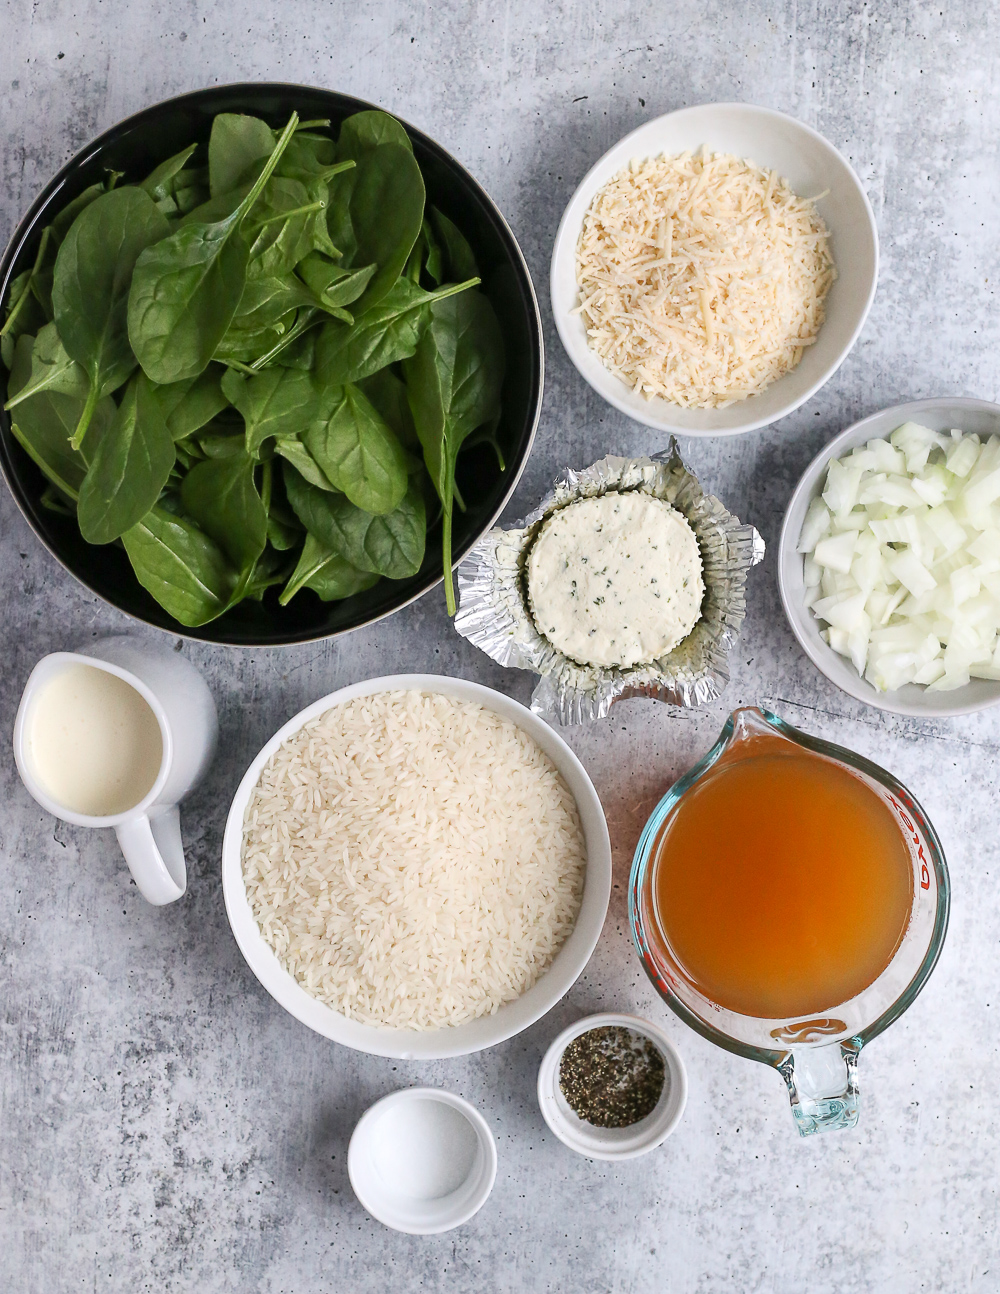 Collection of ingredients for the creamy spinach rice recipe, including uncooked white rice, parmesan cheese, Boursin cheese, fresh spinach, diced onions, heavy cream, vegetable stock, and salt and pepper